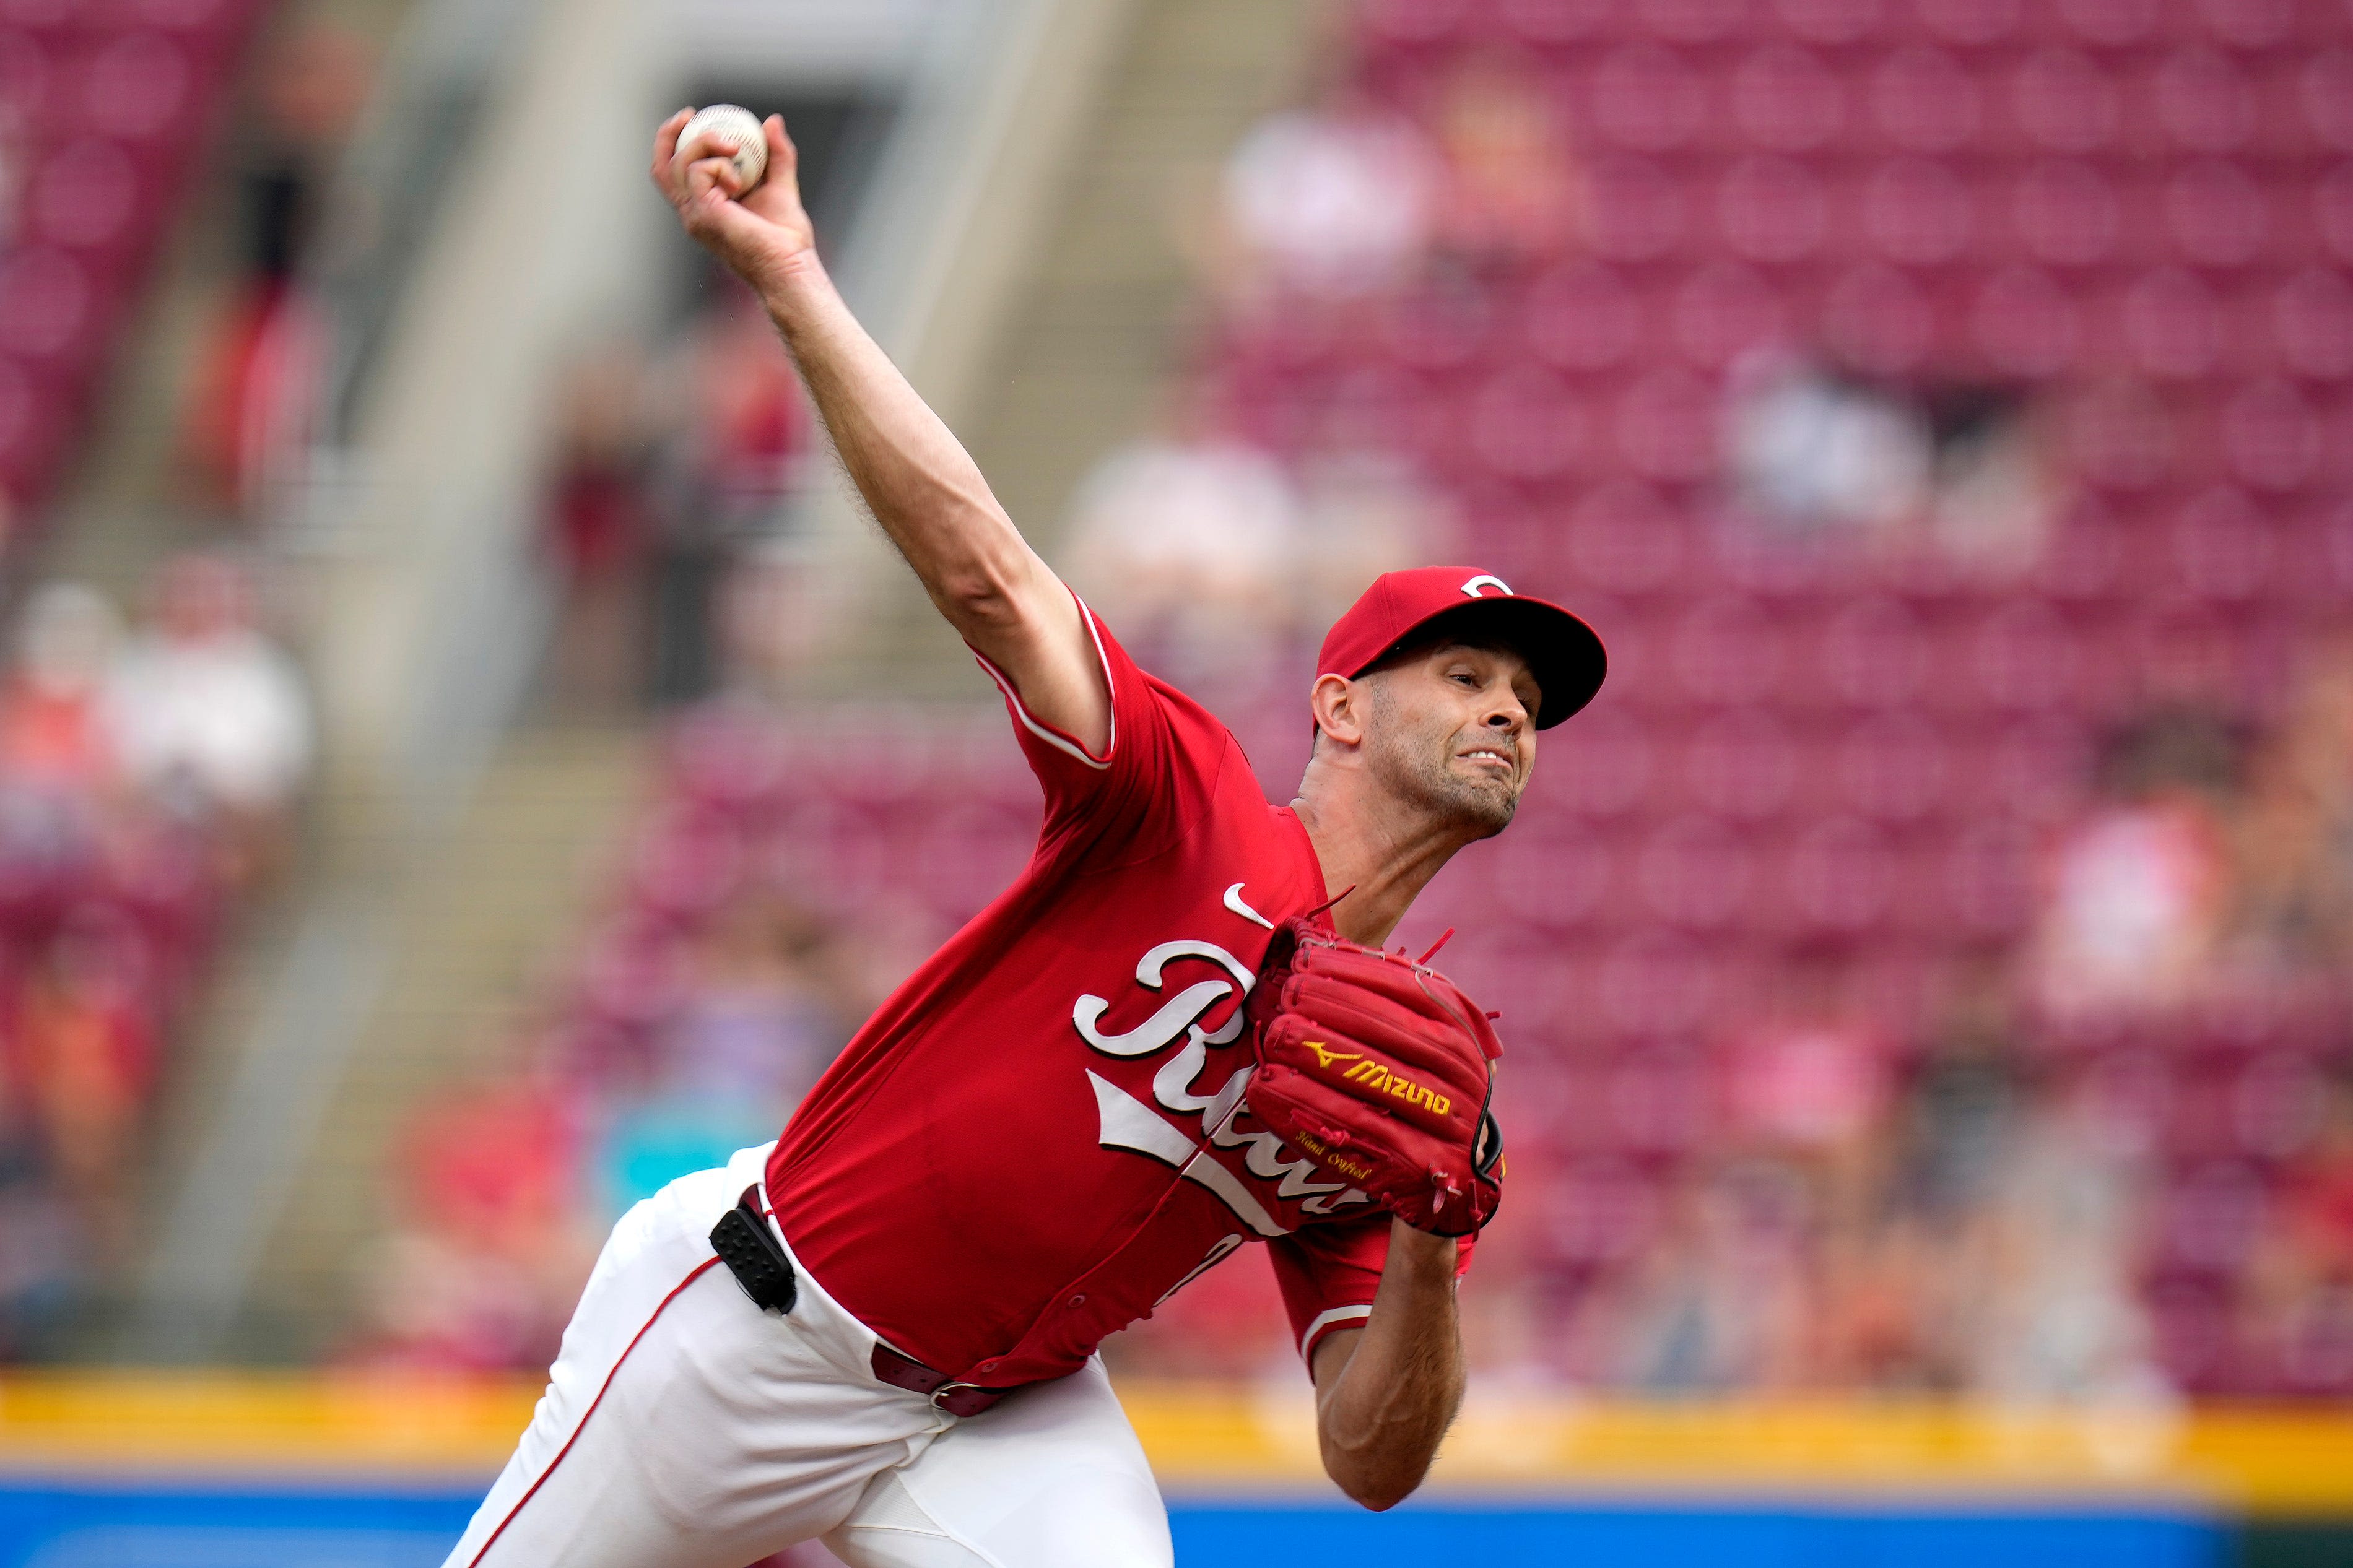 Reds look to win rare series against Padres in Thursday matinee